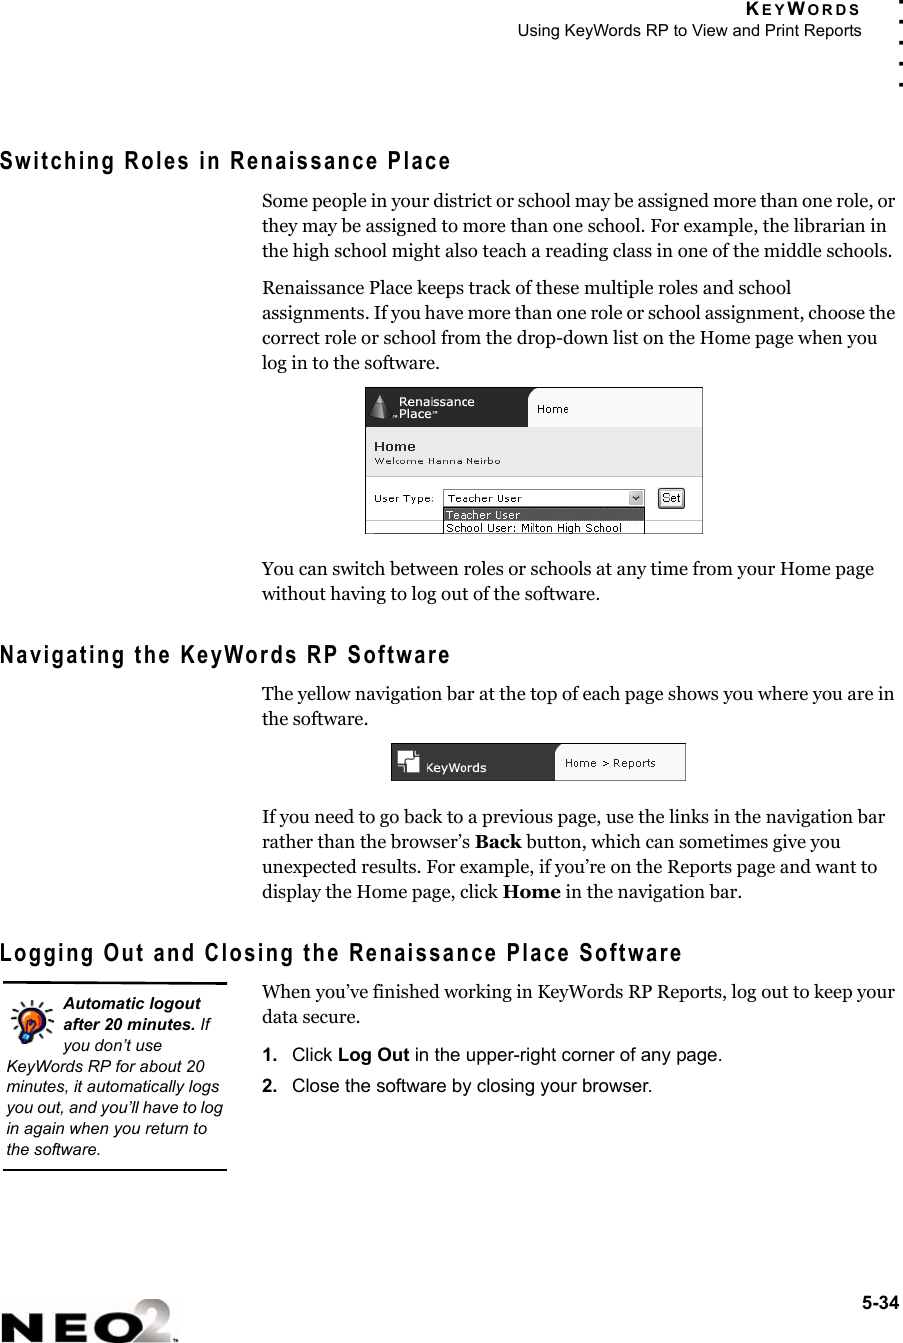 KEYWORDSUsing KeyWords RP to View and Print Reports5-34. . . . .Switching Roles in Renaissance PlaceSome people in your district or school may be assigned more than one role, or they may be assigned to more than one school. For example, the librarian in the high school might also teach a reading class in one of the middle schools.Renaissance Place keeps track of these multiple roles and school assignments. If you have more than one role or school assignment, choose the correct role or school from the drop-down list on the Home page when you log in to the software.You can switch between roles or schools at any time from your Home page without having to log out of the software.Navigating the KeyWords RP SoftwareThe yellow navigation bar at the top of each page shows you where you are in the software.If you need to go back to a previous page, use the links in the navigation bar rather than the browser’s Back button, which can sometimes give you unexpected results. For example, if you’re on the Reports page and want to display the Home page, click Home in the navigation bar.Logging Out and Closing the Renaissance Place SoftwareWhen you’ve finished working in KeyWords RP Reports, log out to keep your data secure.1. Click Log Out in the upper-right corner of any page.2. Close the software by closing your browser.Automatic logout after 20 minutes. If you don’t use KeyWords RP for about 20 minutes, it automatically logs you out, and you’ll have to log in again when you return to the software.